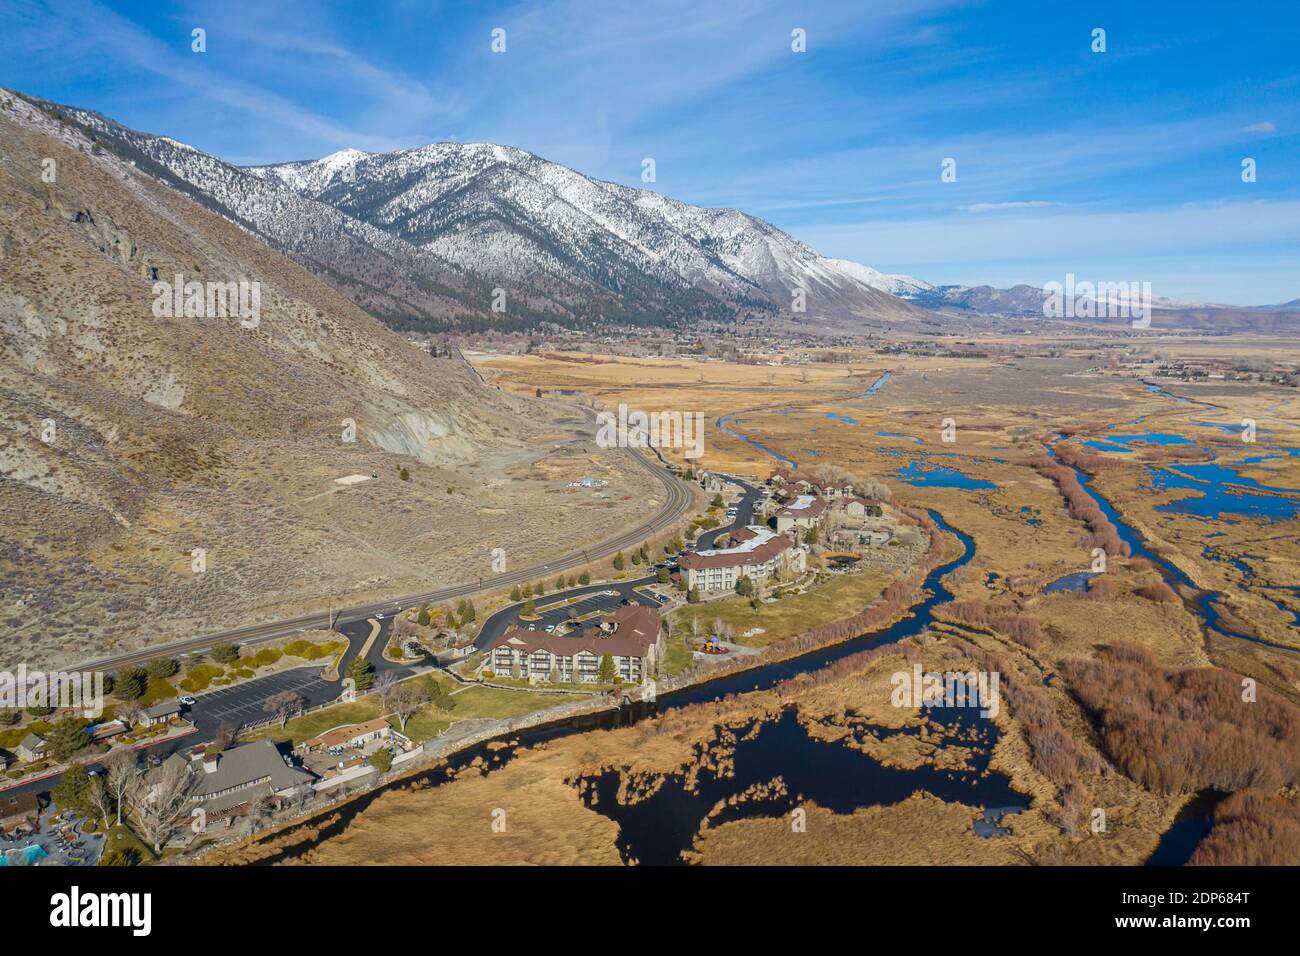 GENOA, NEVADA, UNITED STATES - Dec 15, 2020: David Walley's Hot Springs Resort and Holiday Inn Club Vacations complex stands in the landscape beneath Stock Photo